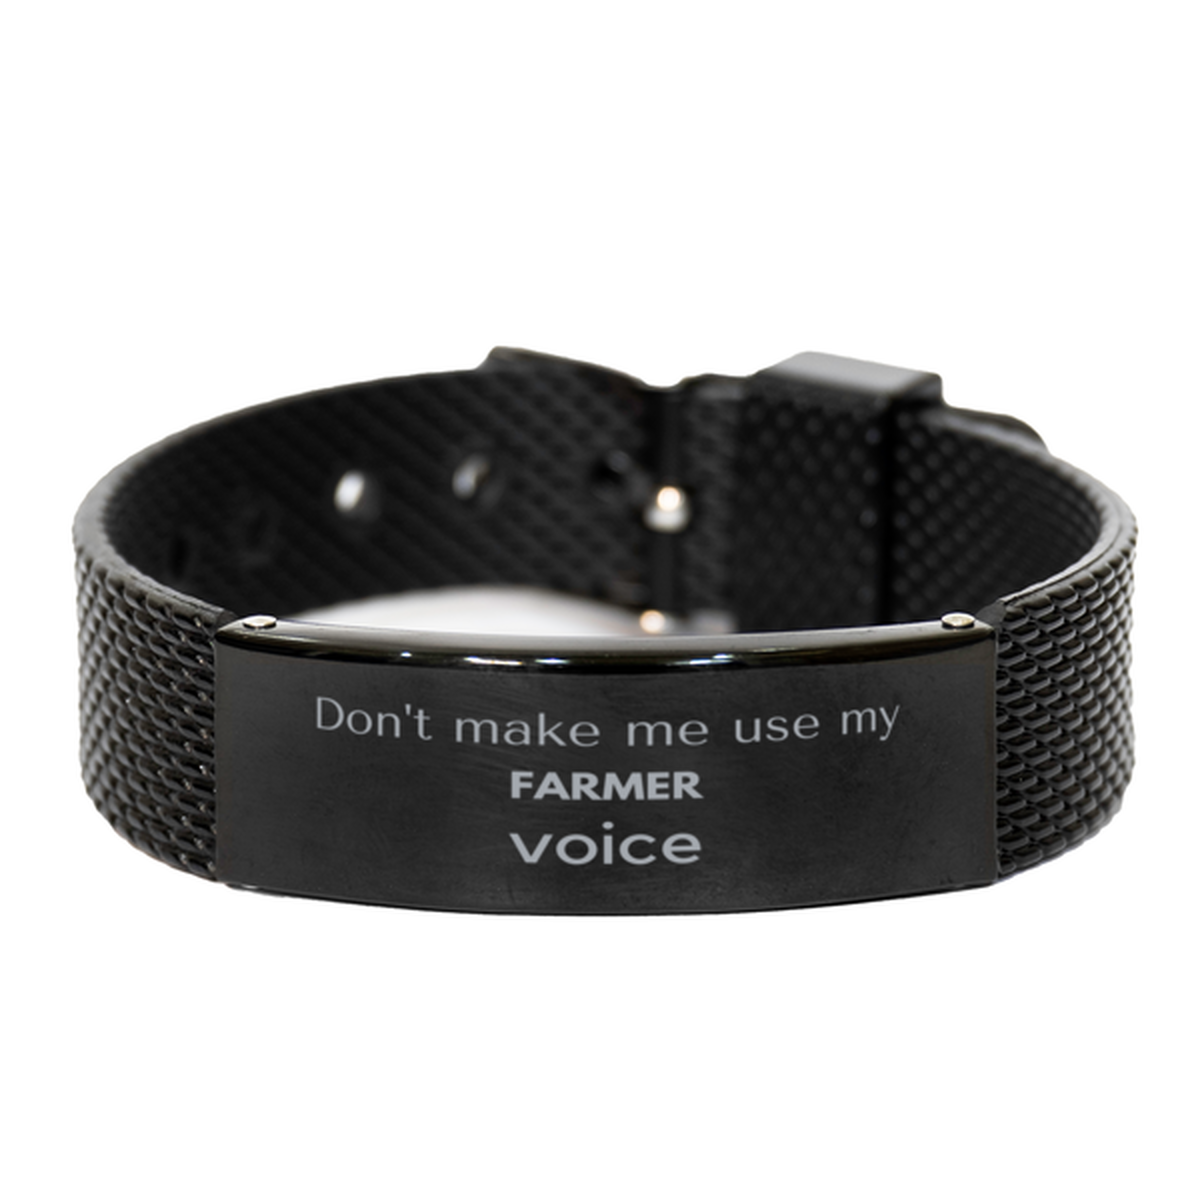 Don't make me use my Farmer voice, Sarcasm Farmer Gifts, Christmas Farmer Black Shark Mesh Bracelet Birthday Unique Gifts For Farmer Coworkers, Men, Women, Colleague, Friends